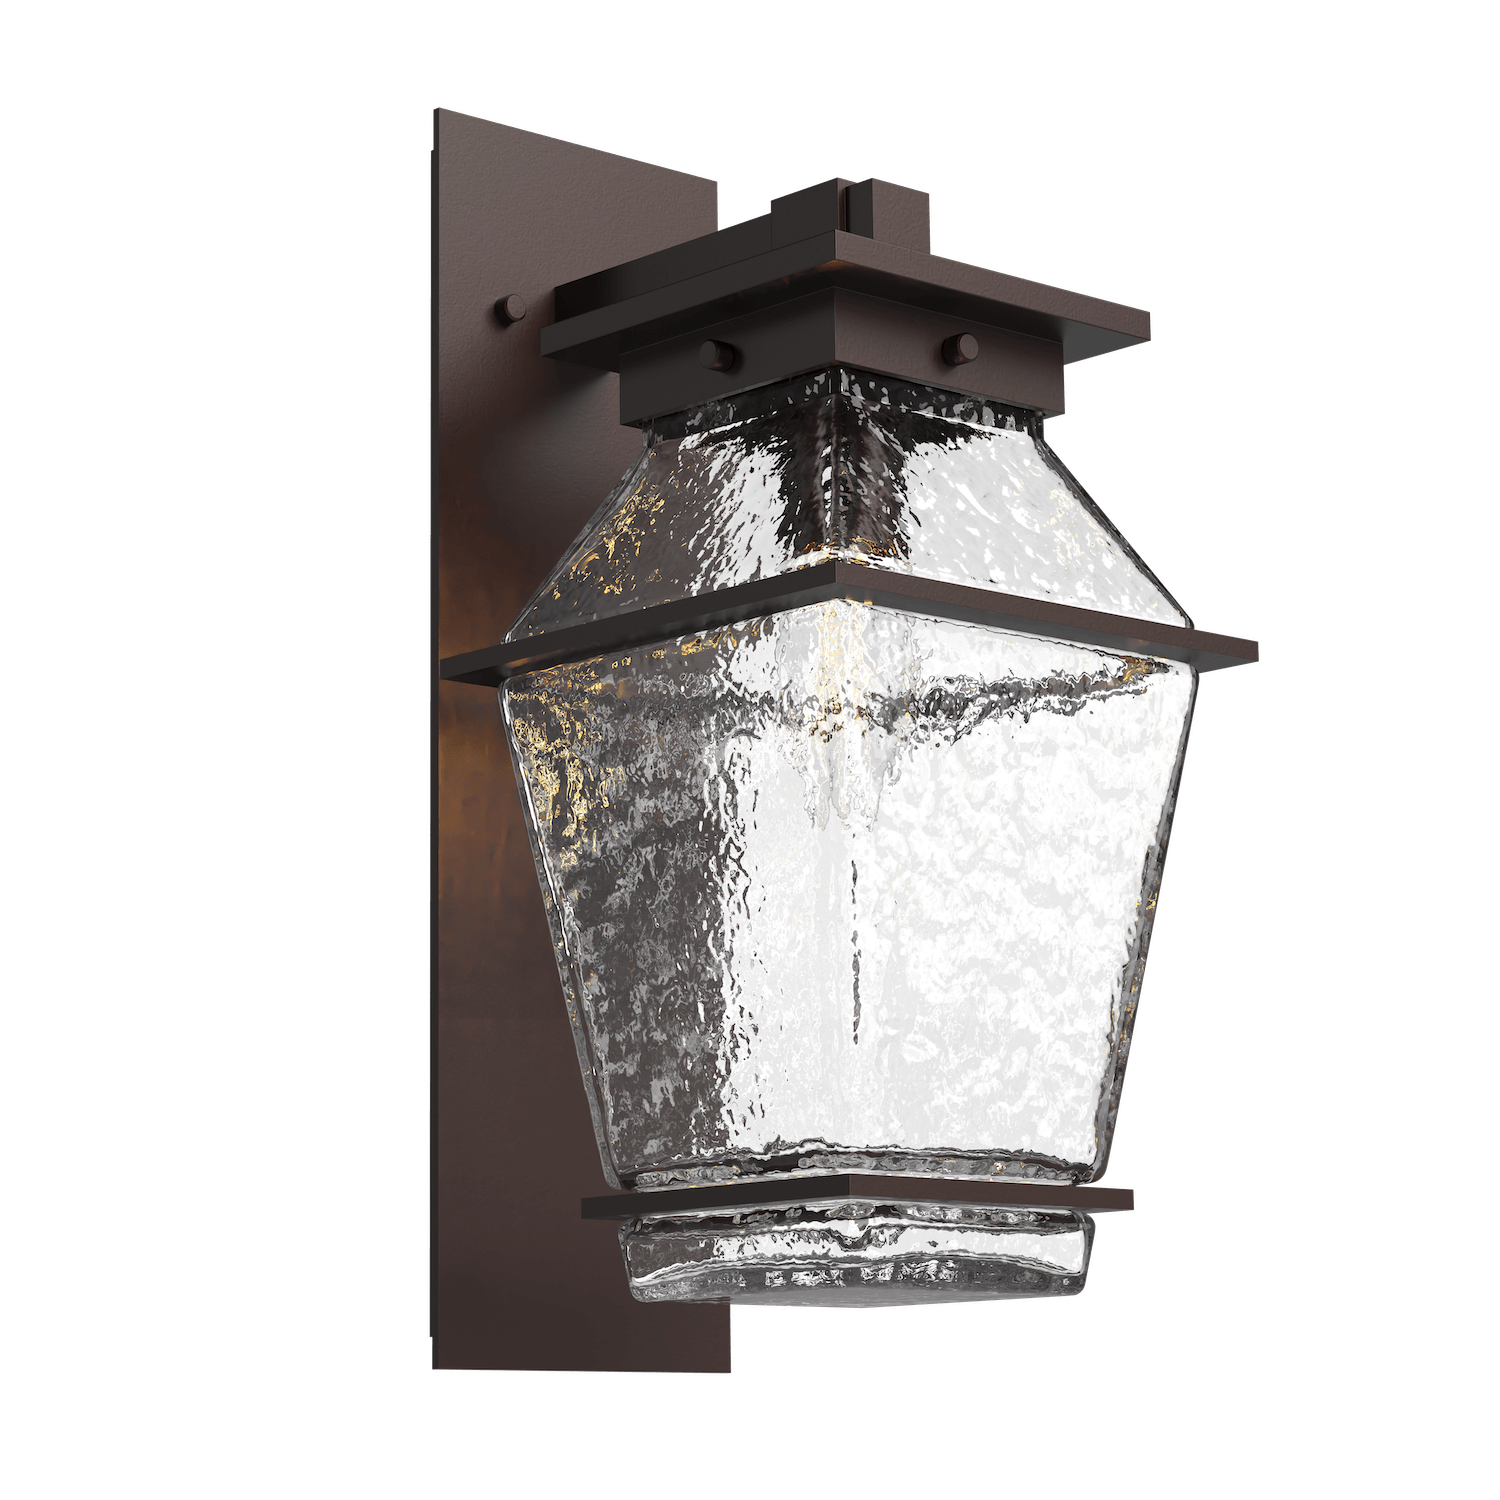 ODB0077-01-SB-C-Hammerton-Studio-Landmark-16-inch-outdoor-arm-sconce-with-statuary-bronze-finish-and-clear-blown-glass-shades-and-incandescent-lamping